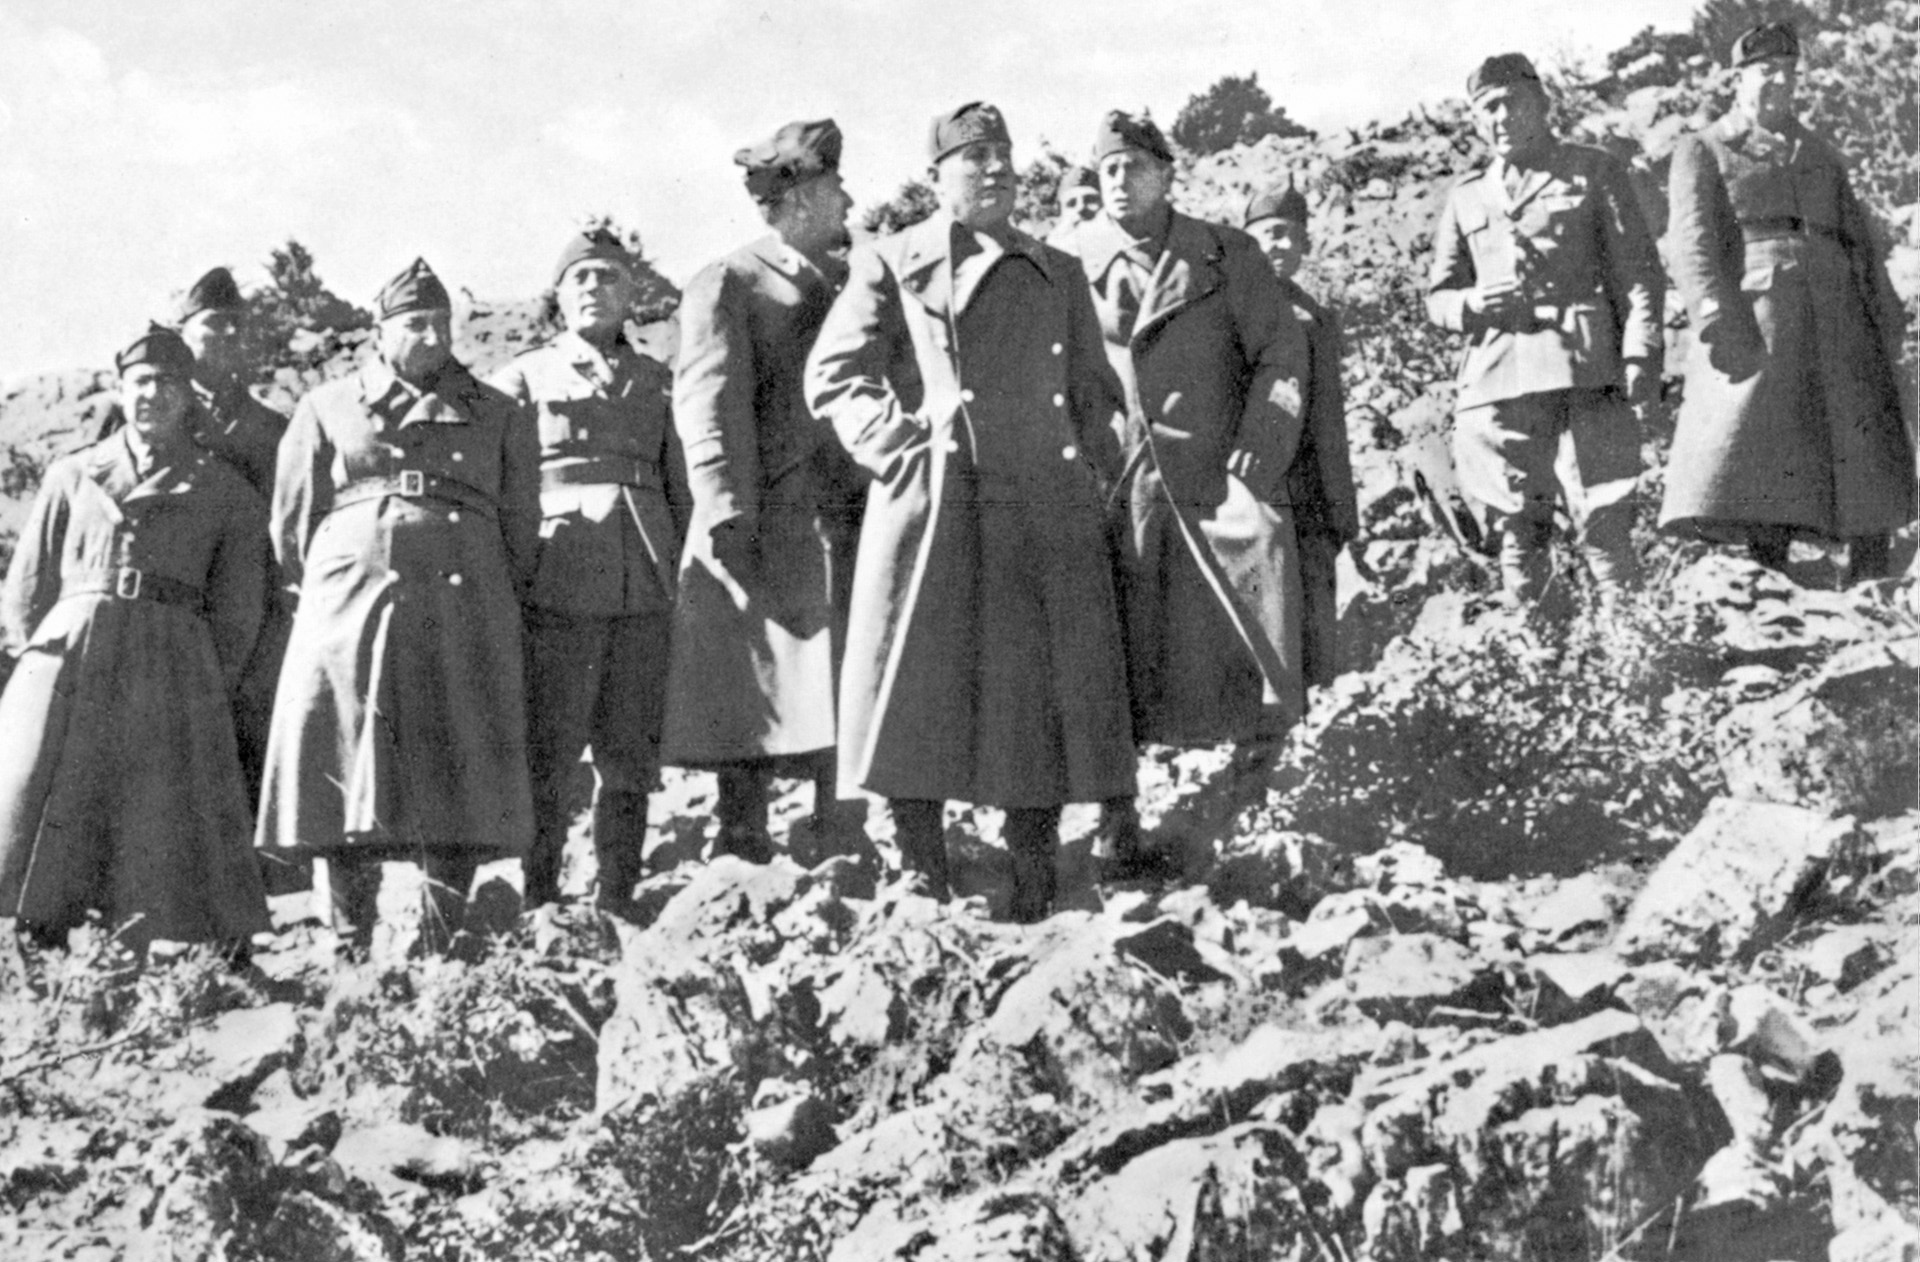 Mussolini visits the front line in Greece during March 1941. While his goal was to inspire the Italian troops, the results of the visit are questionable.